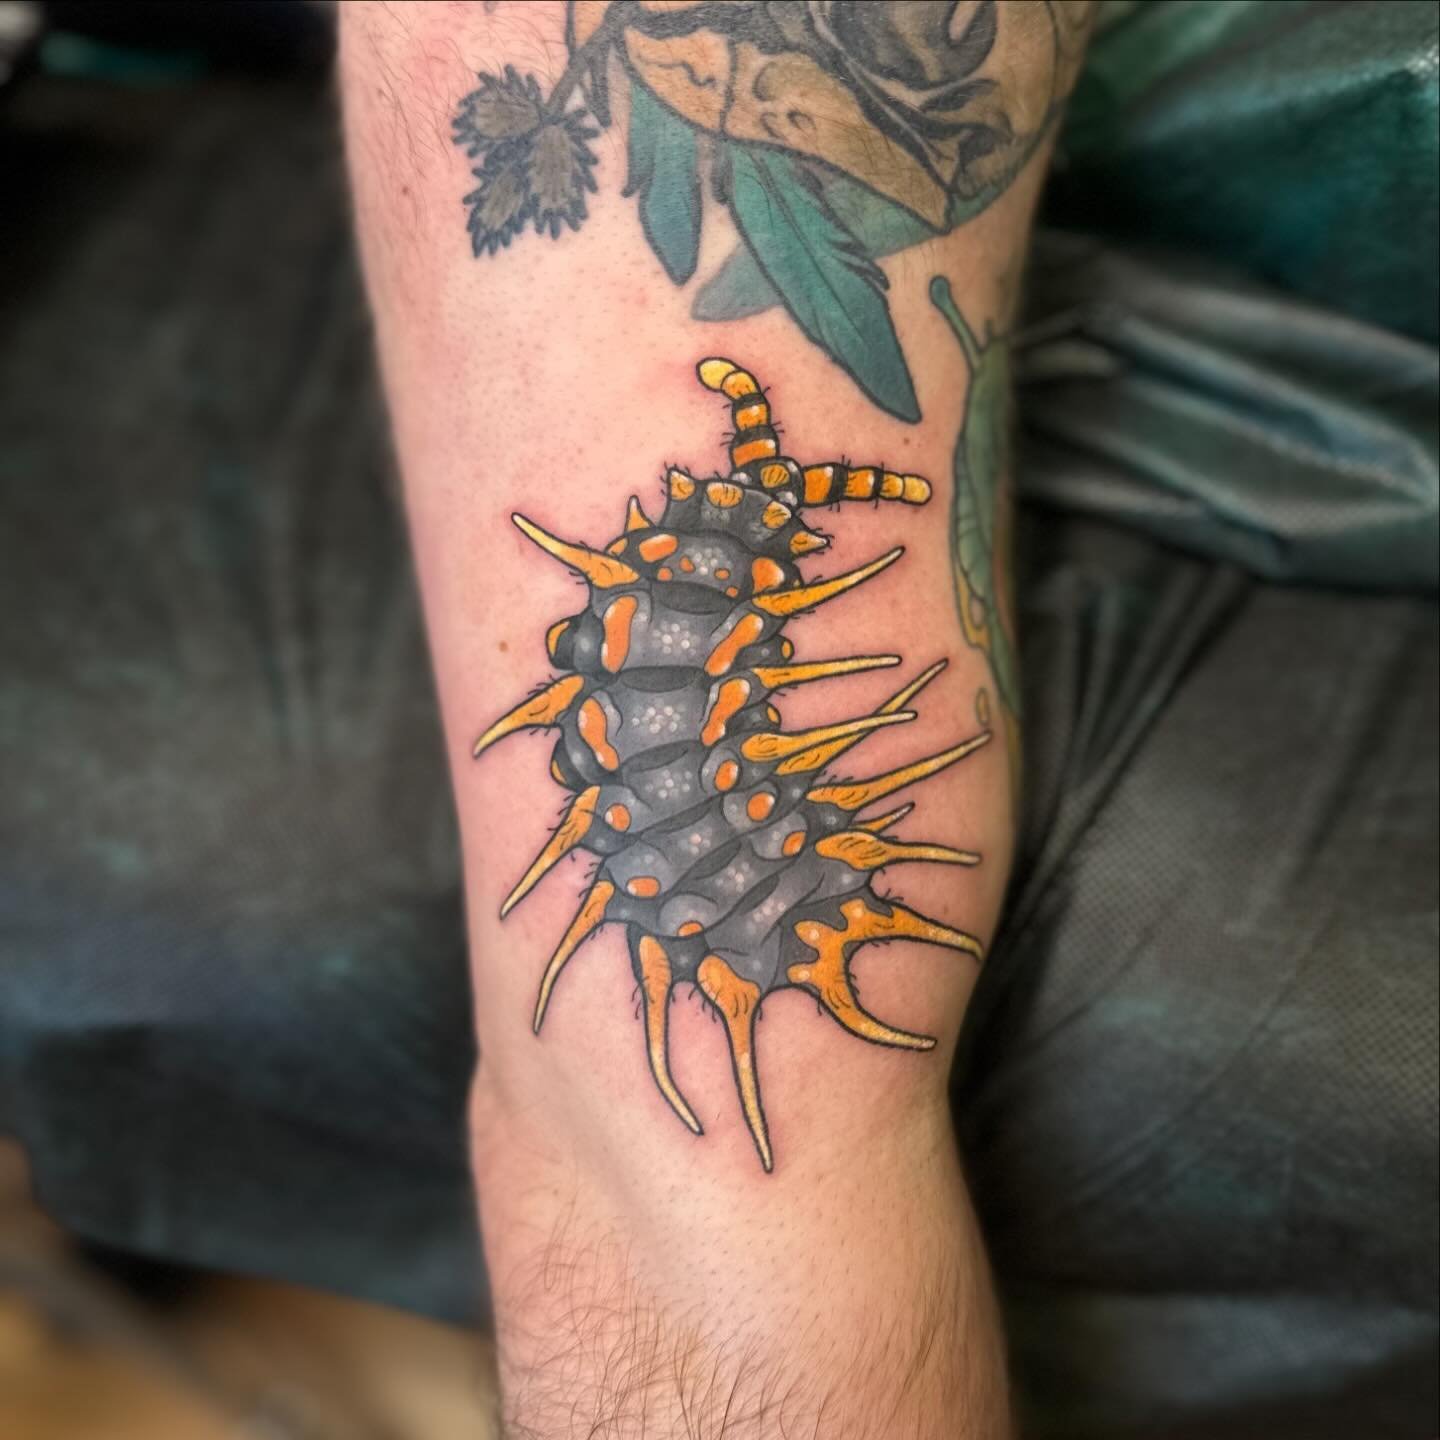 Little springtail for Arin✨ who&rsquo;s collected all the coolest bugs from me!! We&rsquo;re doin touch ups this week so I&rsquo;ll post some healed shots of all of them soon 👀
.
.
.
#Tattoo #ladytattooers #ohiotattooers #columbustattooers #whiterav